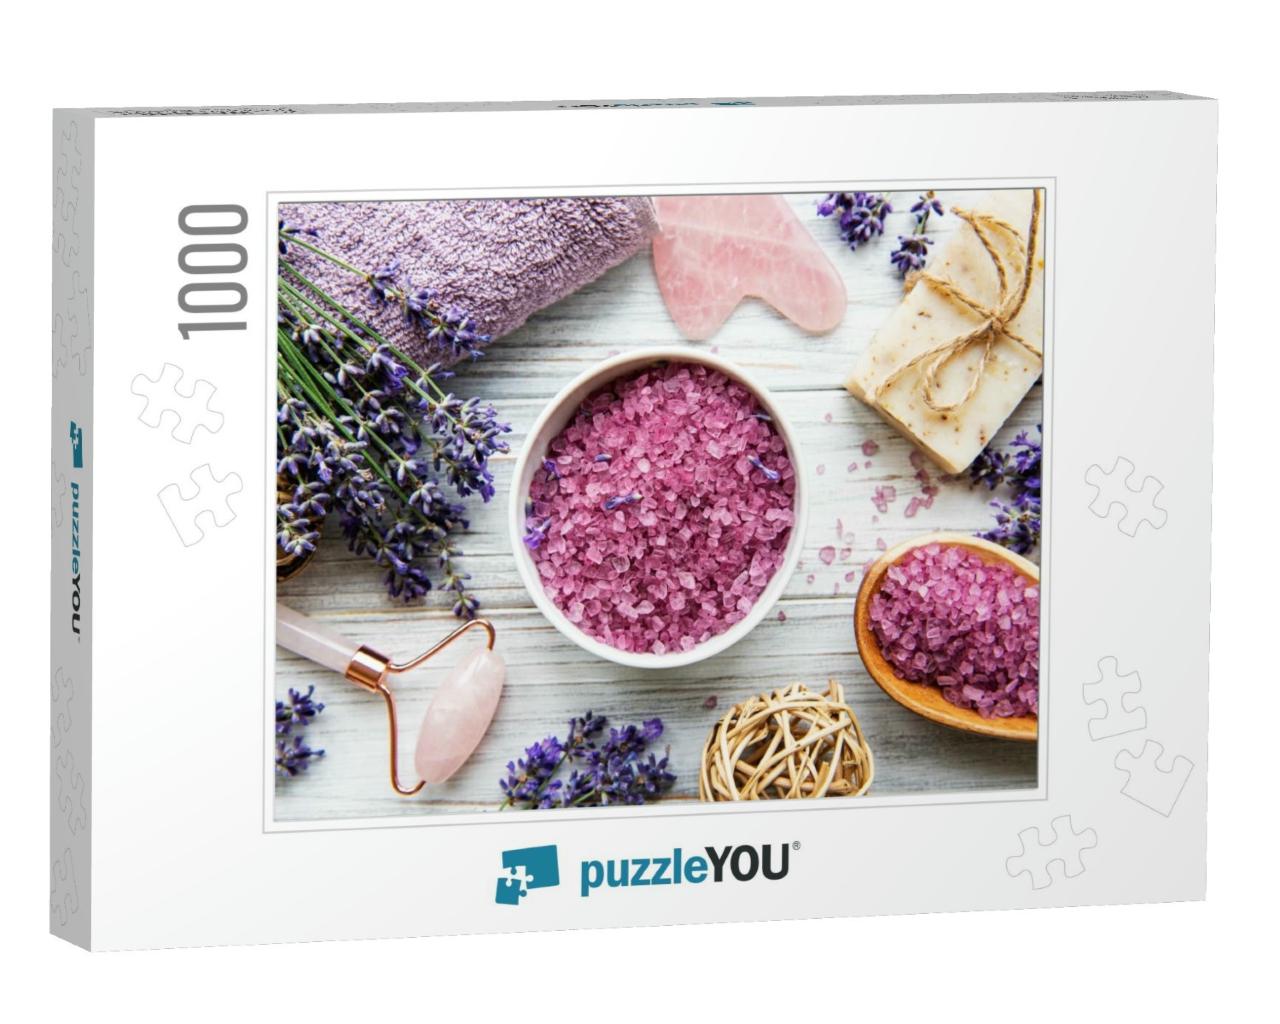 Natural Organic Spa Cosmetic with Lavender. Flat Lay Bath... Jigsaw Puzzle with 1000 pieces